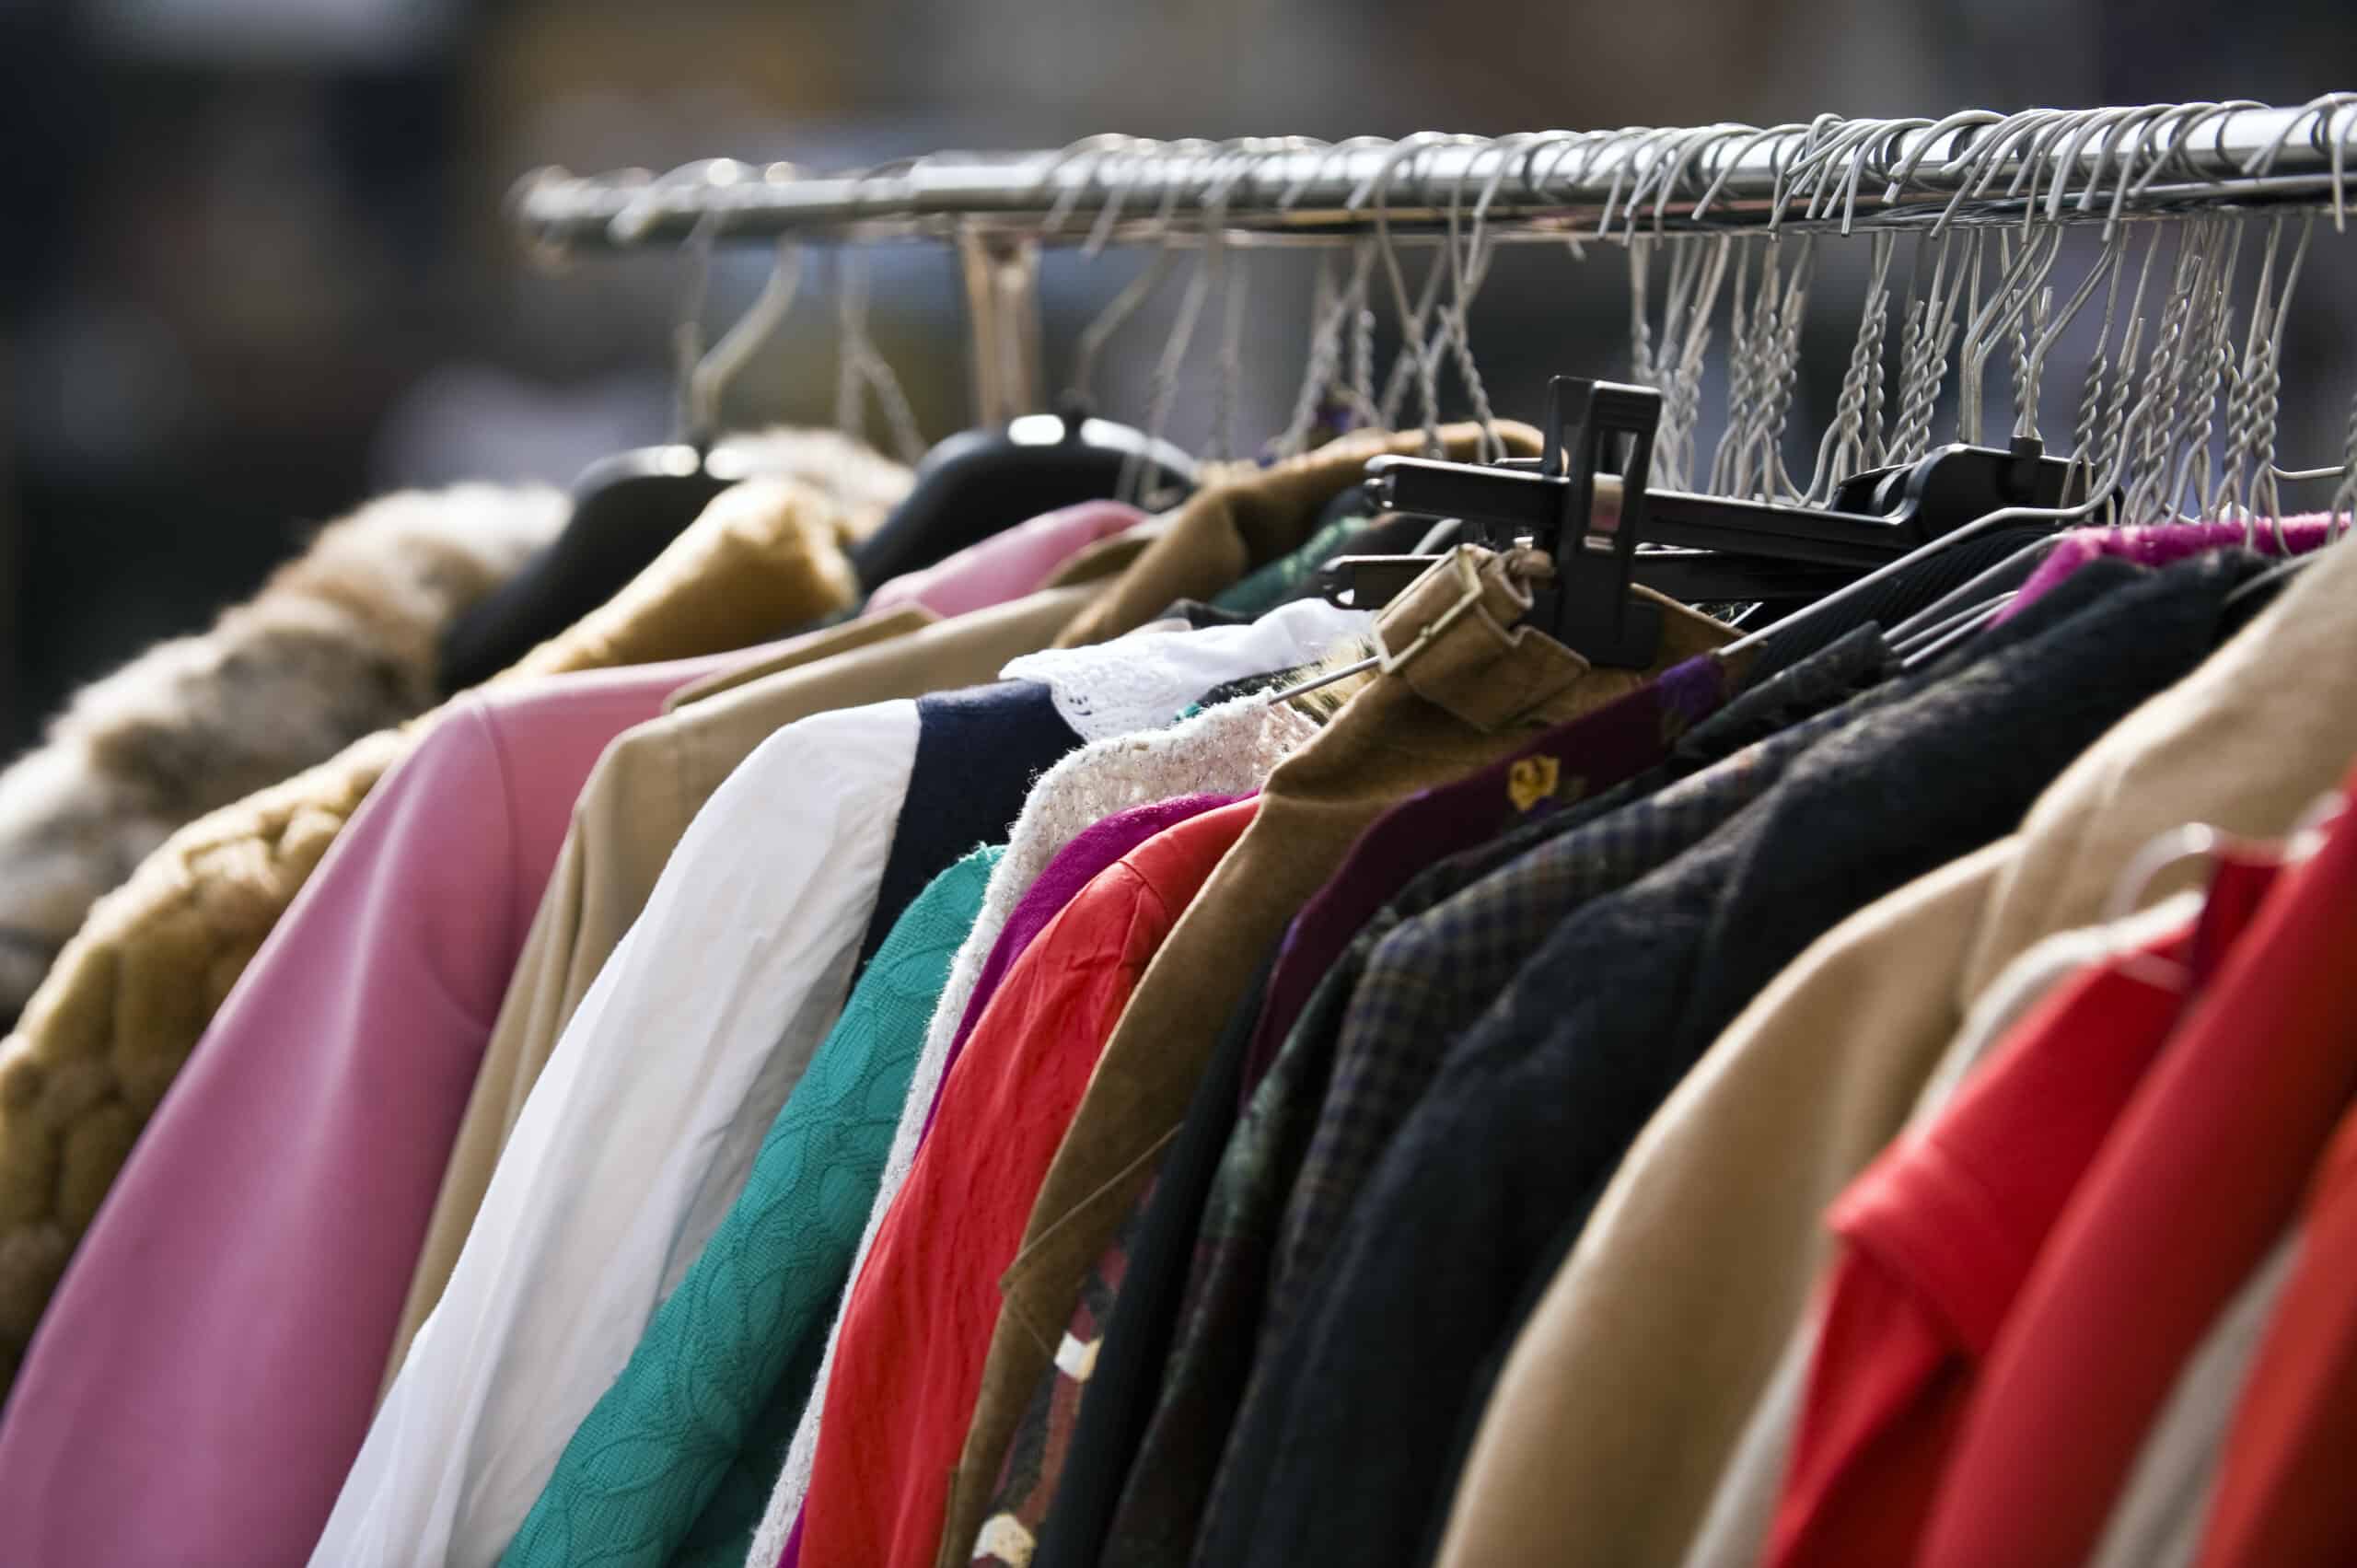 A variety of clothing items hanging on a rack, including shirts, jackets, and coats in different colors and materials.